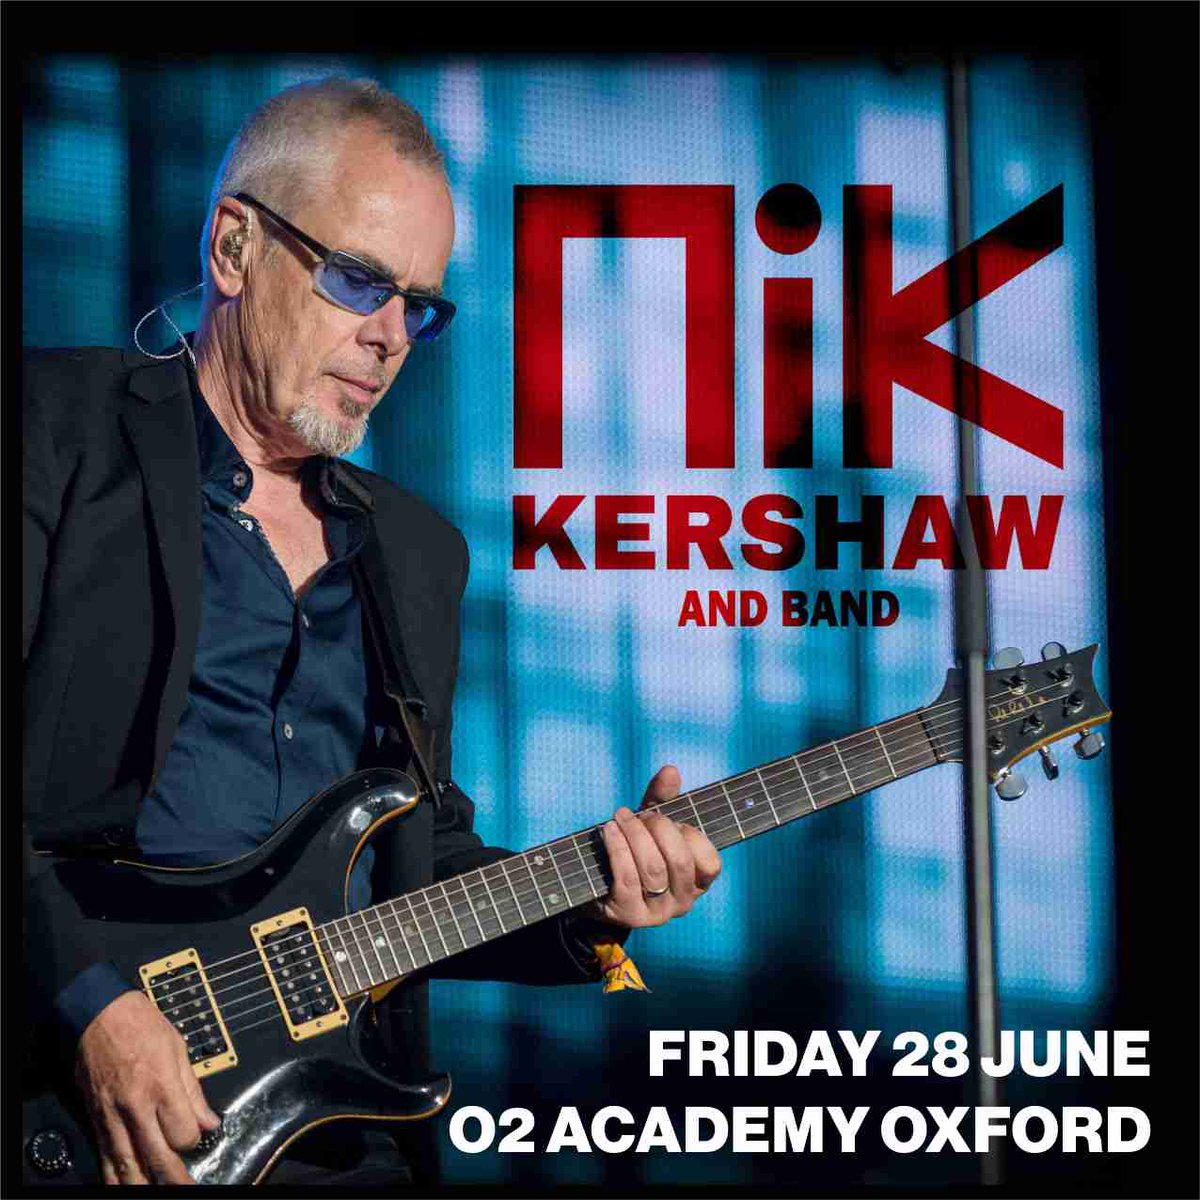 .@NikKershaw and his fabulous band play this very special and intimate festival warm-up show in Oxford - Friday 28 June. Tickets available - amg-venues.com/xXU050Rtl65